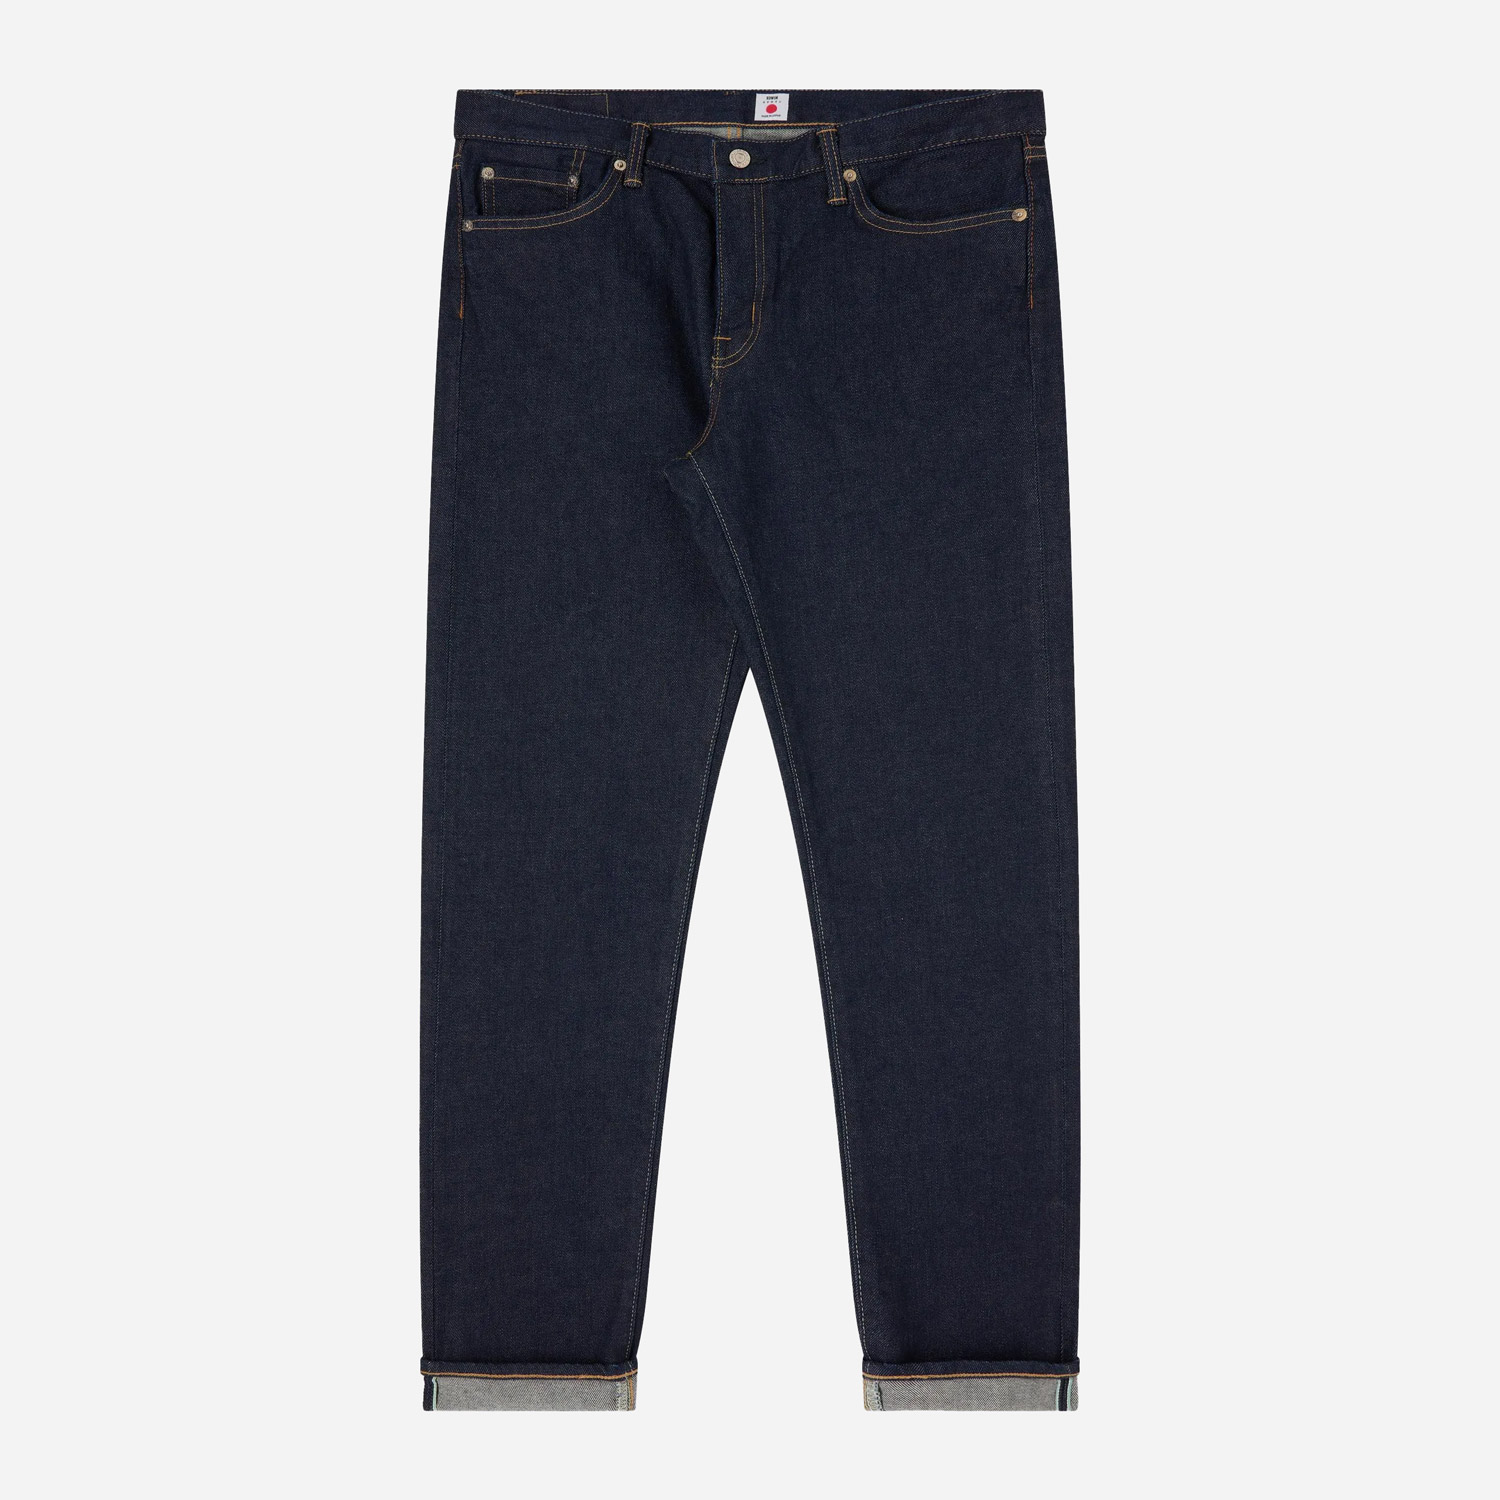 Edwin Kaihara Blue Stretch Regular Taper Fit Jean - Green x White Selvage